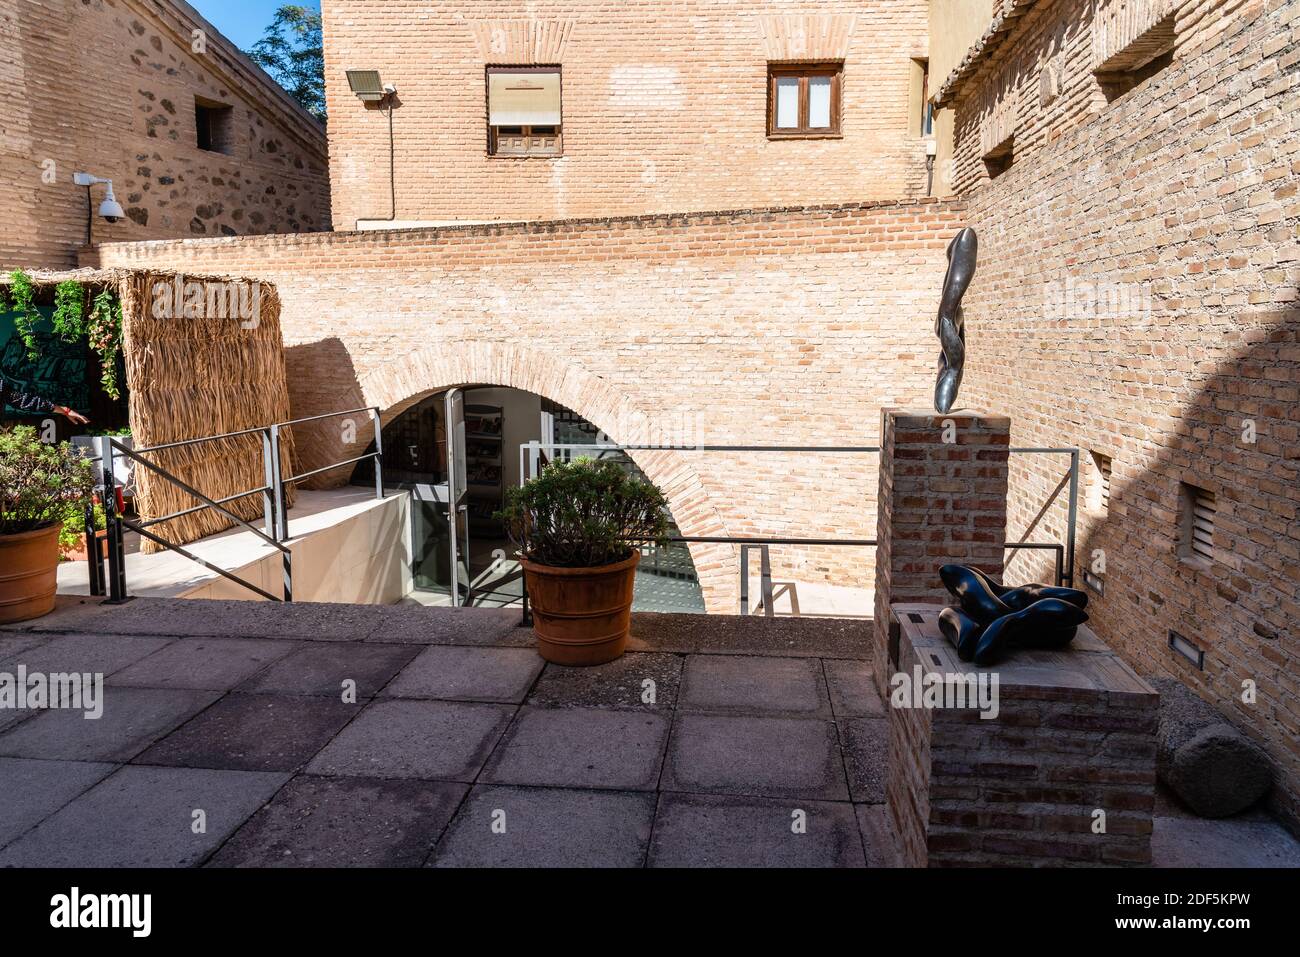 Toledo, Spain - October 13, 2017: Outdoor view of courtyard of Synagogue of Transito. It is a historic building famous for its rich stucco decoration Stock Photo